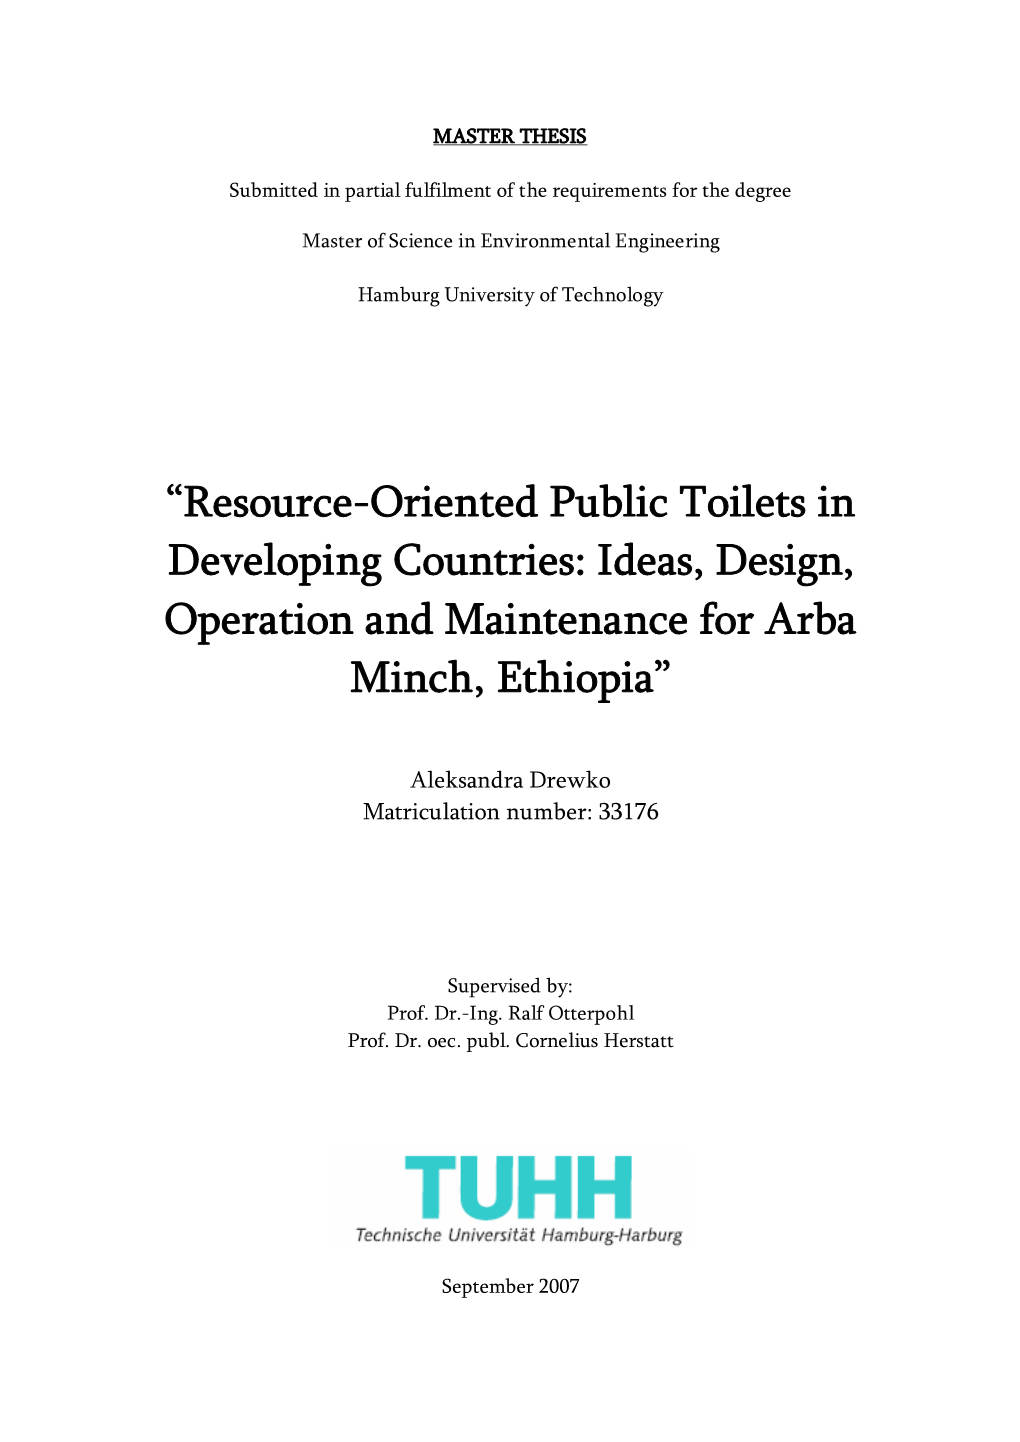 Resource-Oriented Public Toilets in Developing Countries: Ideas, Design, Operation and Maintenance for Arba Minch, Ethiopia”